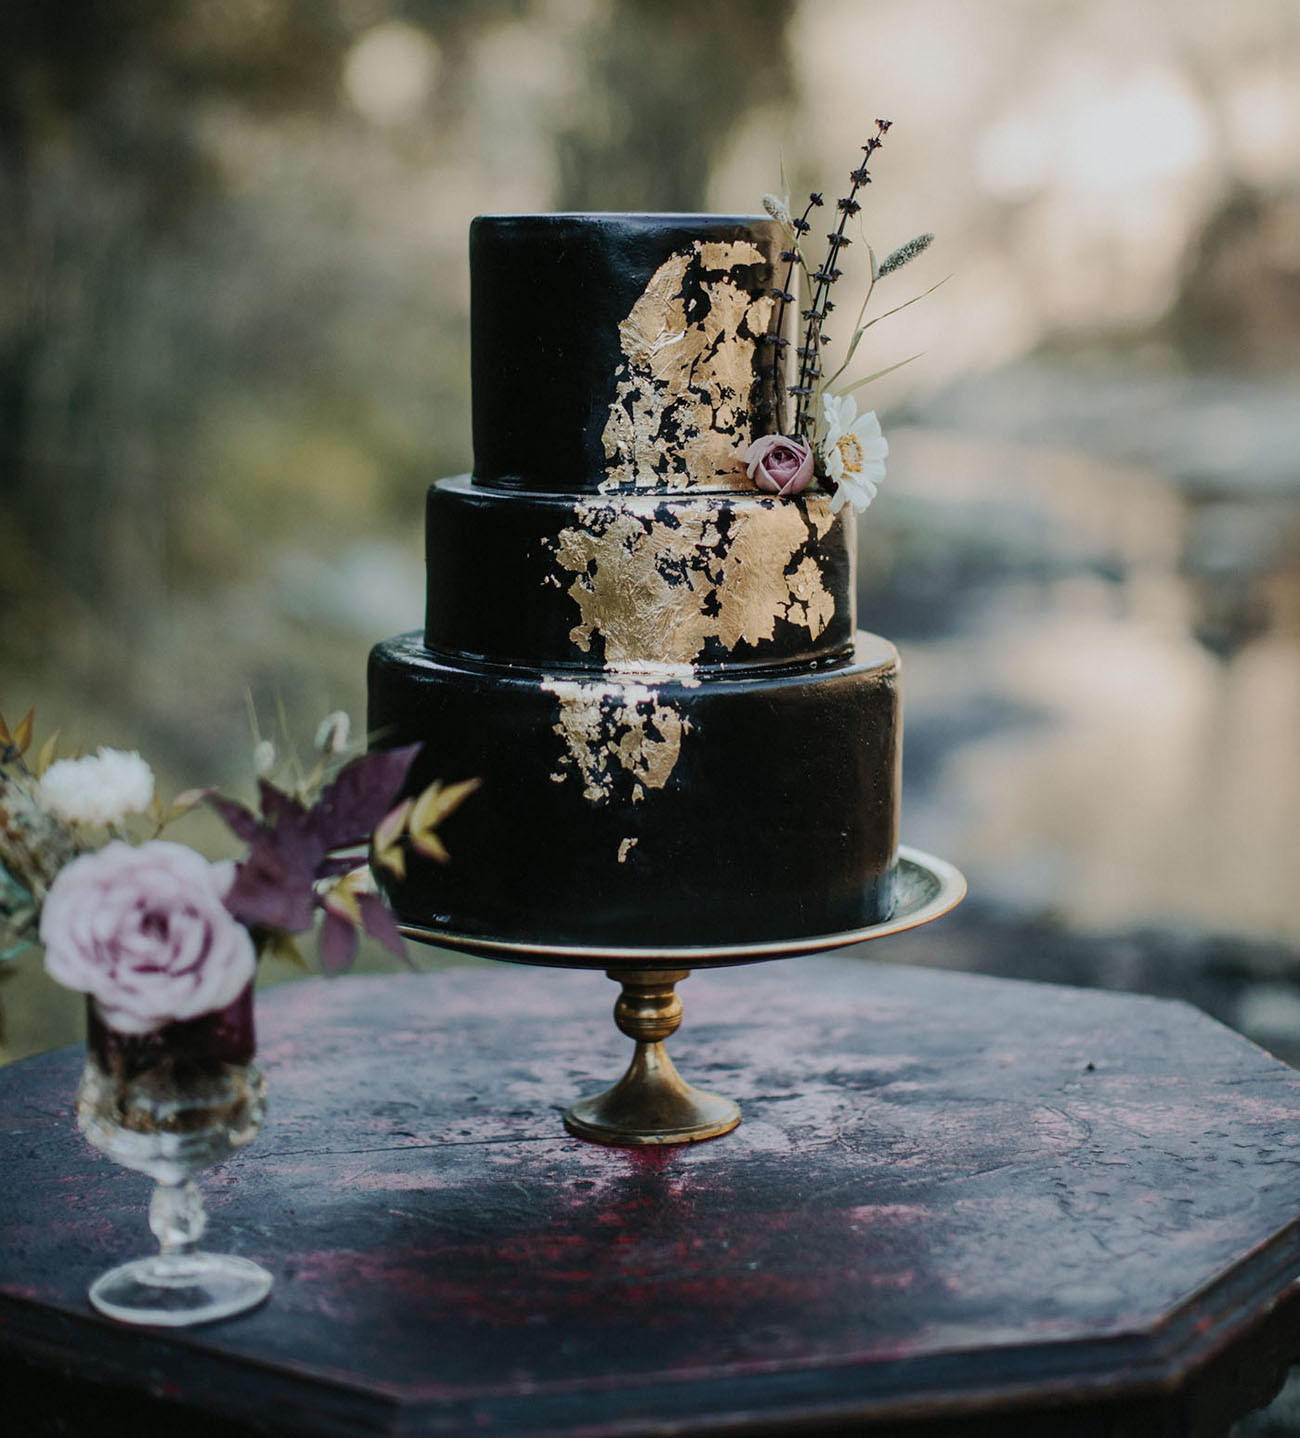 Black Wedding Cake
 14 of the Most Chic Unexpected Black Wedding Cakes